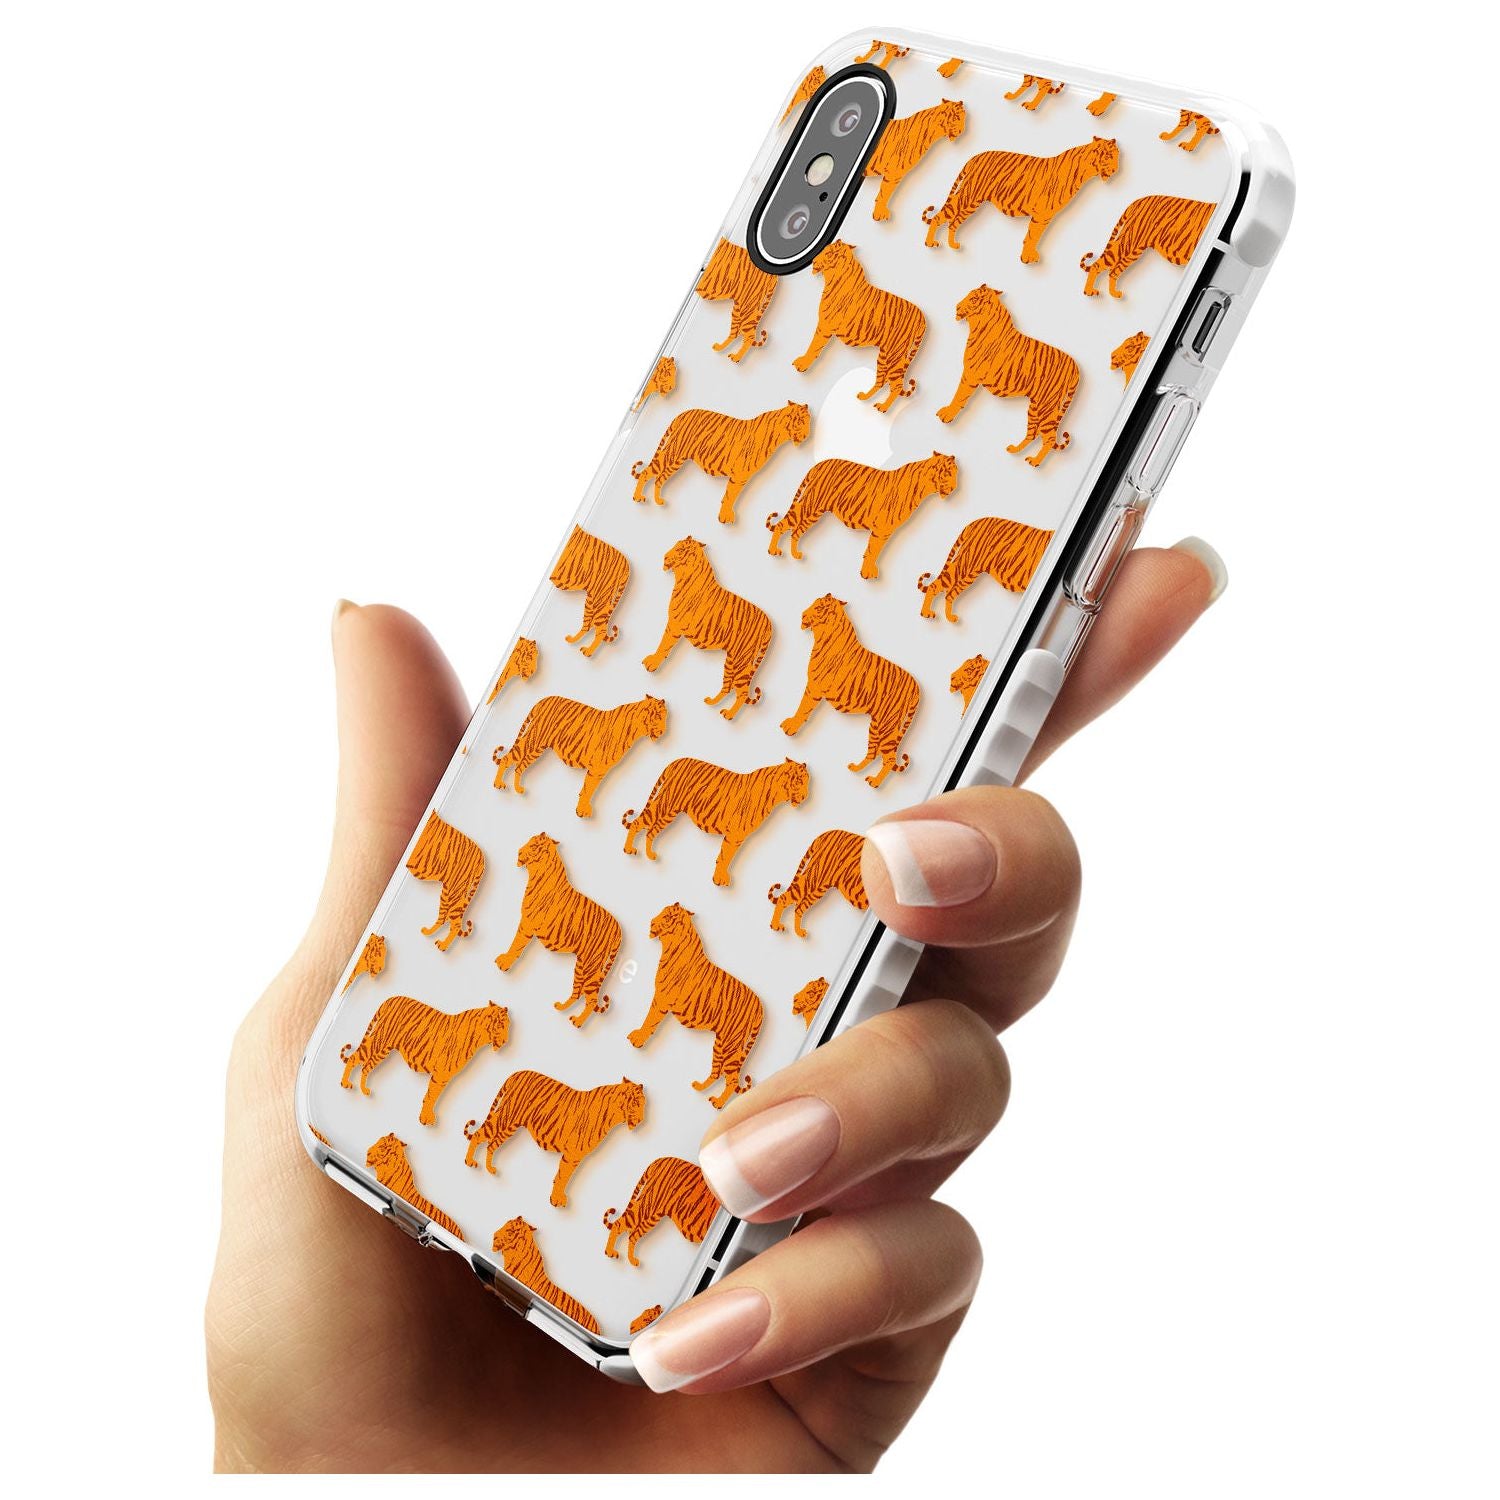 Tigers on Clear Pattern Impact Phone Case for iPhone X XS Max XR